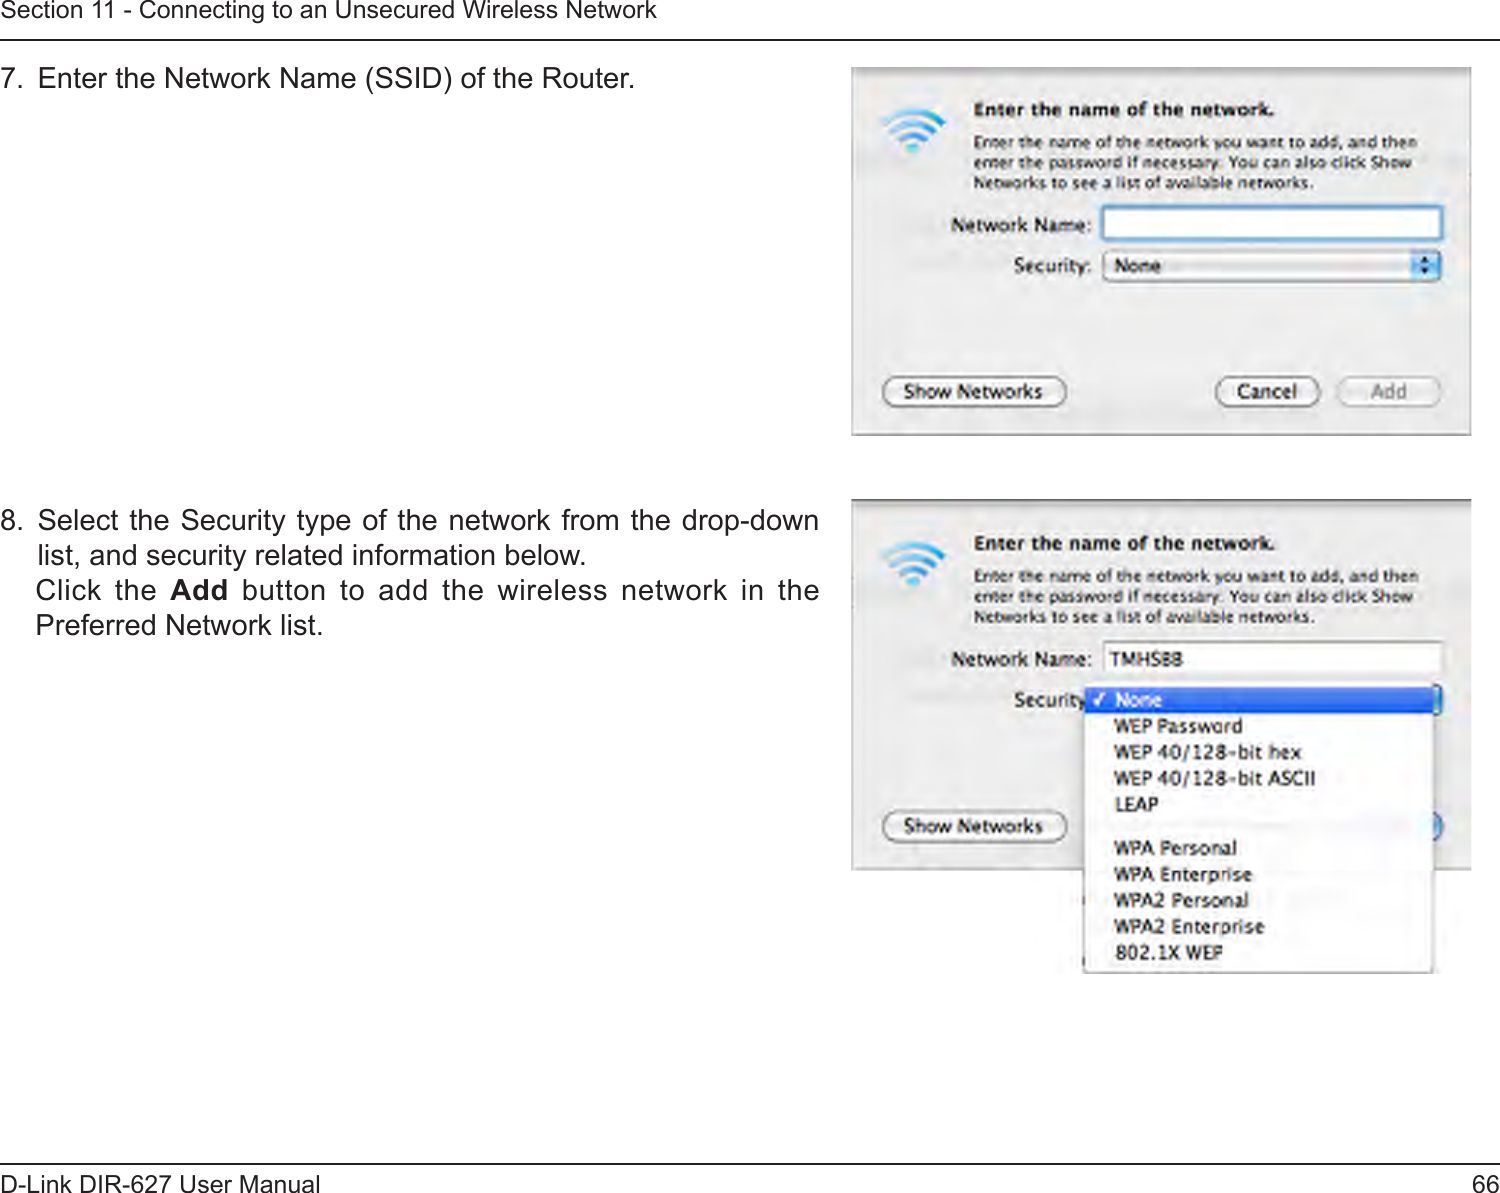 66D-Link DIR-627 User ManualSection 11 - Connecting to an Unsecured Wireless Network7.  Enter the Network Name (SSID) of the Router.8.  Select the Security type of the network from the drop-down list, and security related information below.Click  the  Add  button  to  add  the  wireless  network  in  the Preferred Network list. 